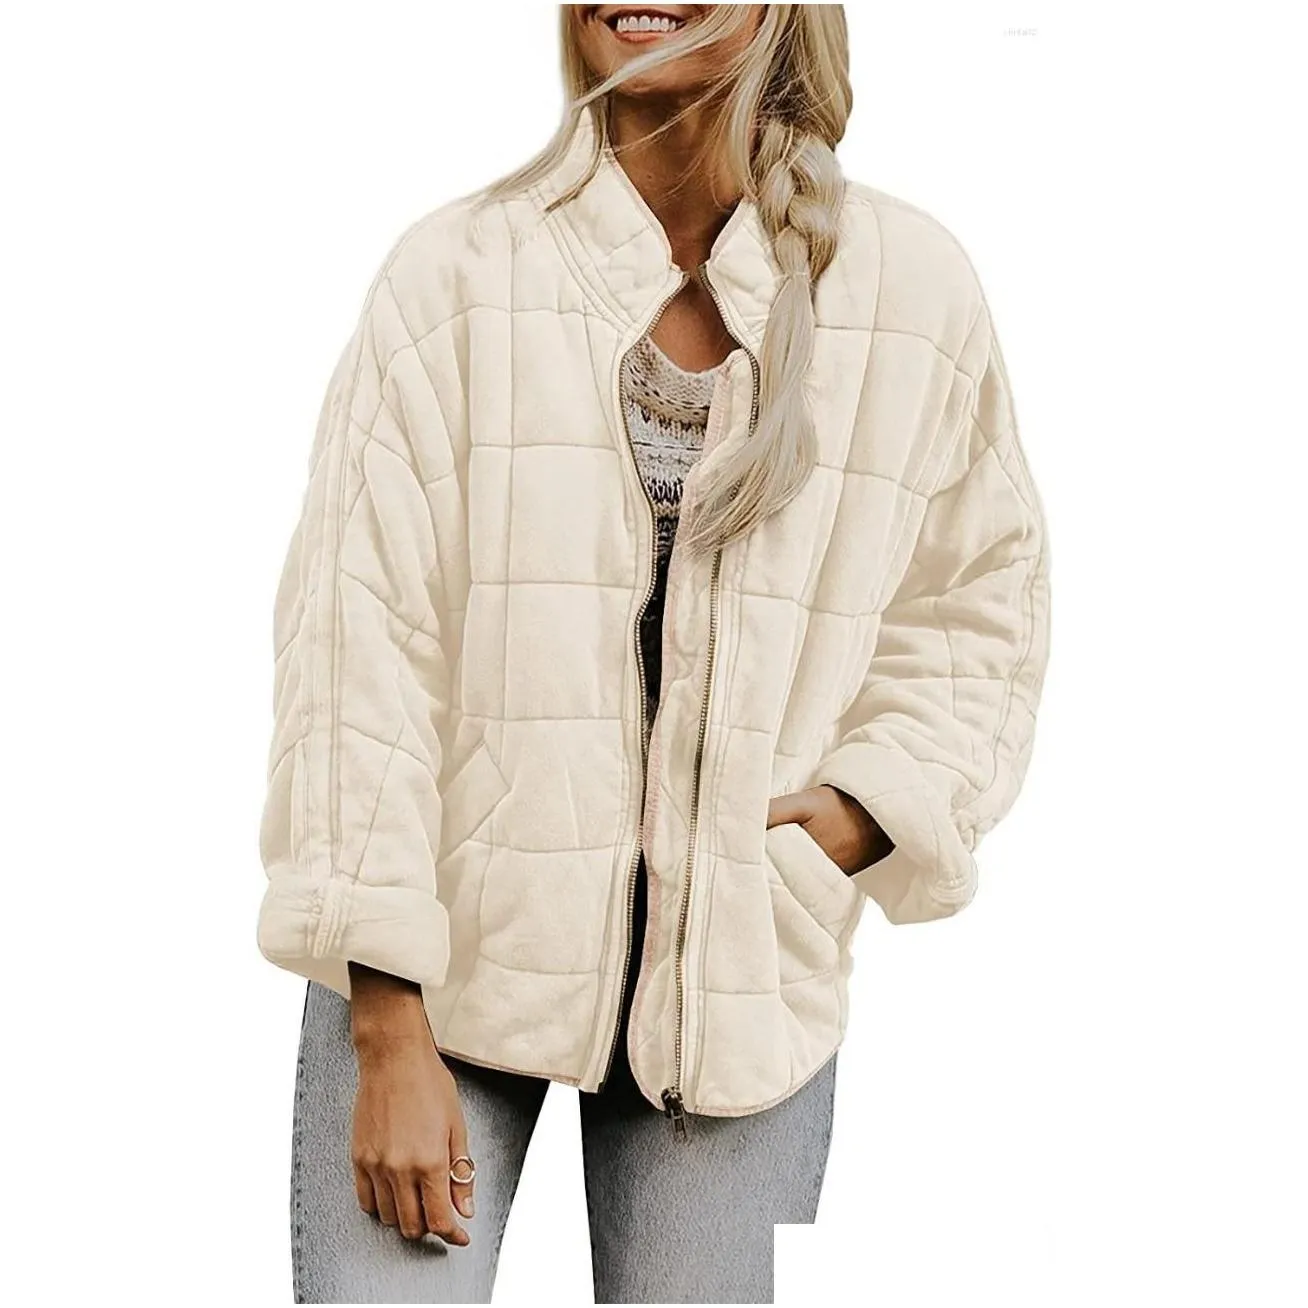 Women`s Jackets Winter Coats For Women Warm Fleece Coat Loose Plain Quilted Stand Collar Zip Up Cotton Jacket Outerwear With Pocket